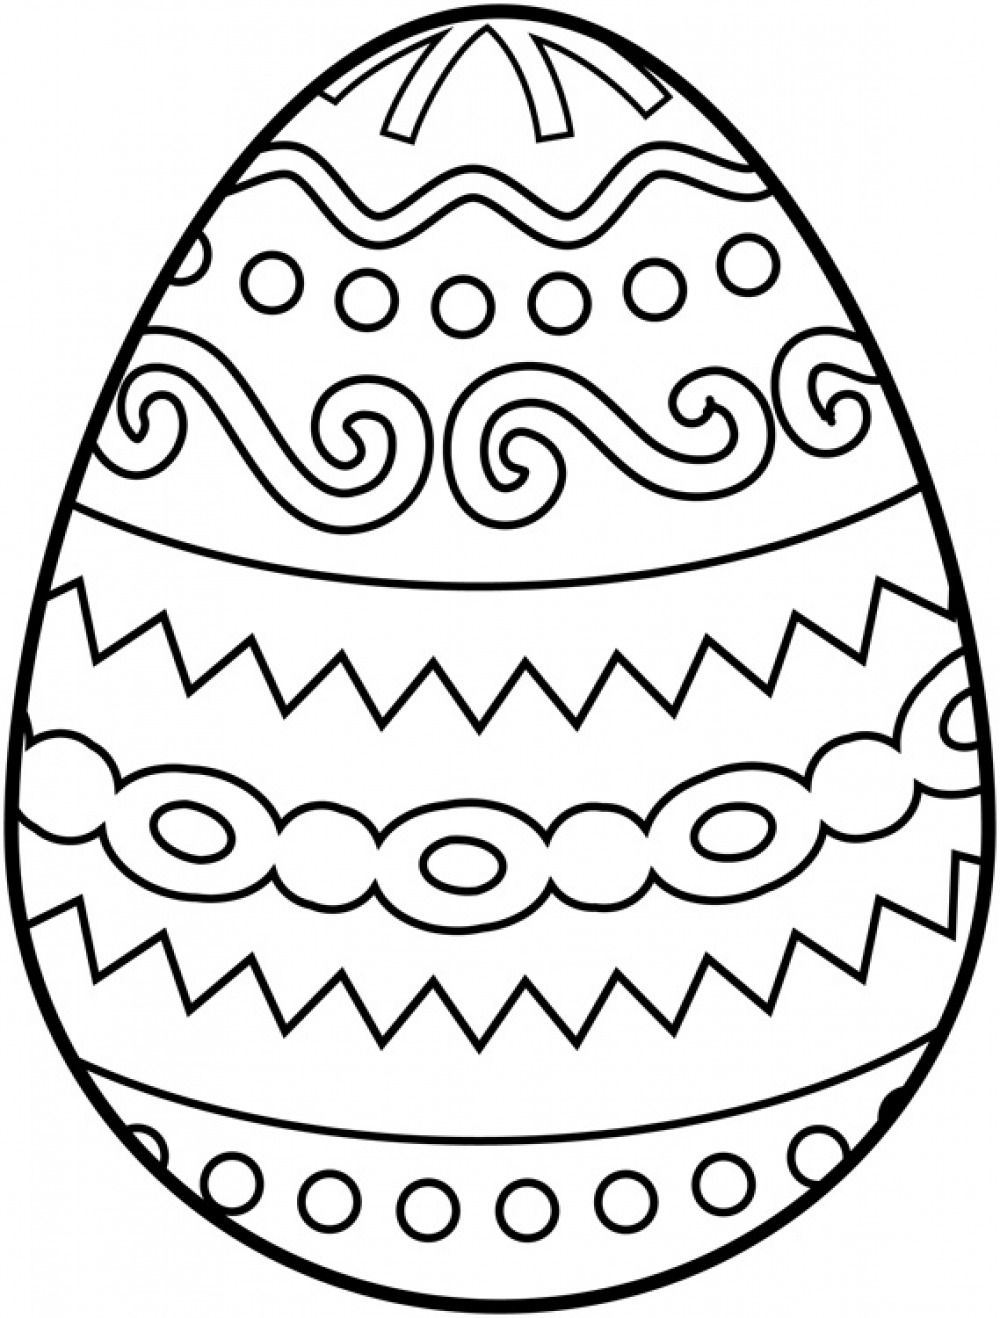 easter-egg-coloring-page-easter-egg-coloring-wreath-coloring-pages-to-print-wreath-coloring-pages-printable.jpg